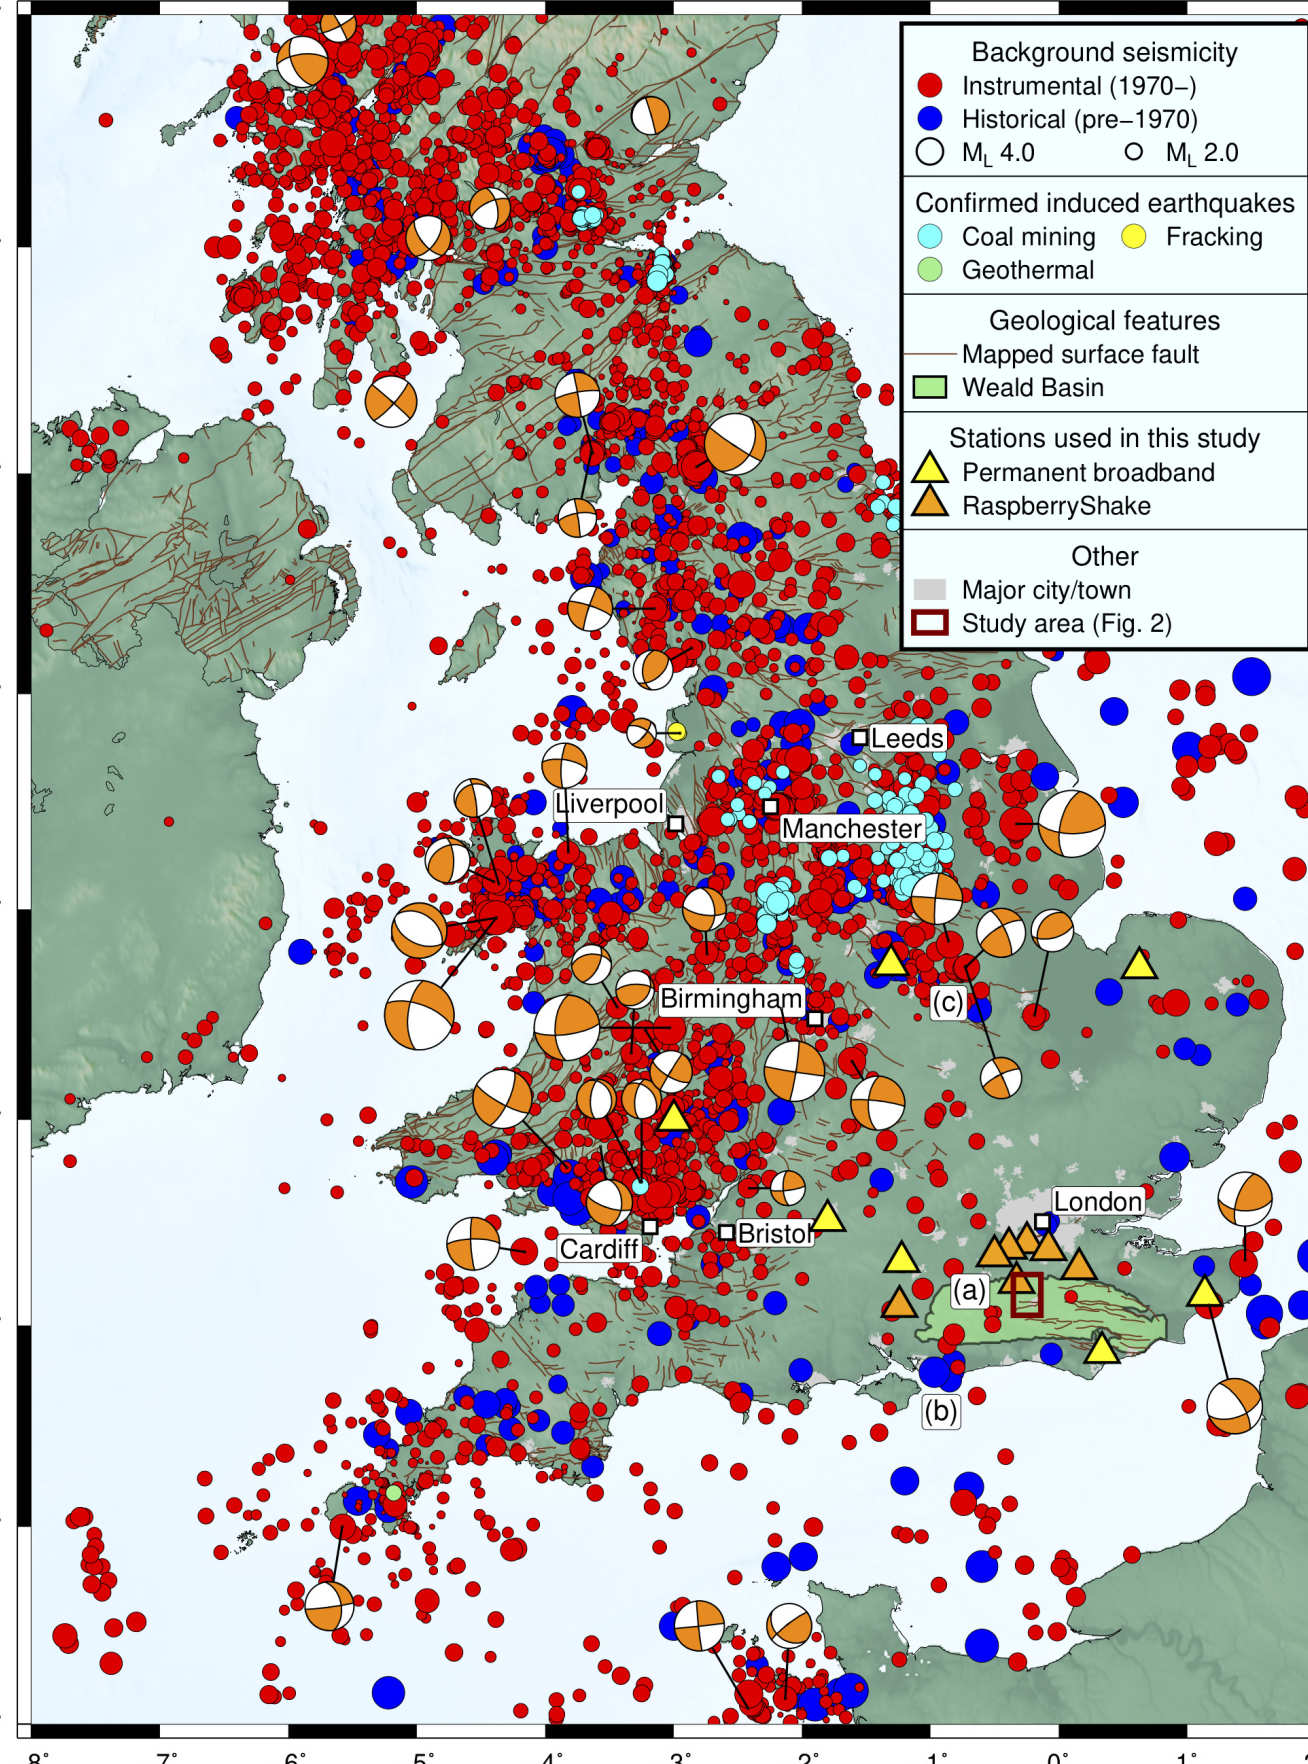 Map of earthquake data in England and Wales, showing the study area south of London and indicating background seismic activity (from BGS), industrial-induced earthquakes, and locations of study seismometers.